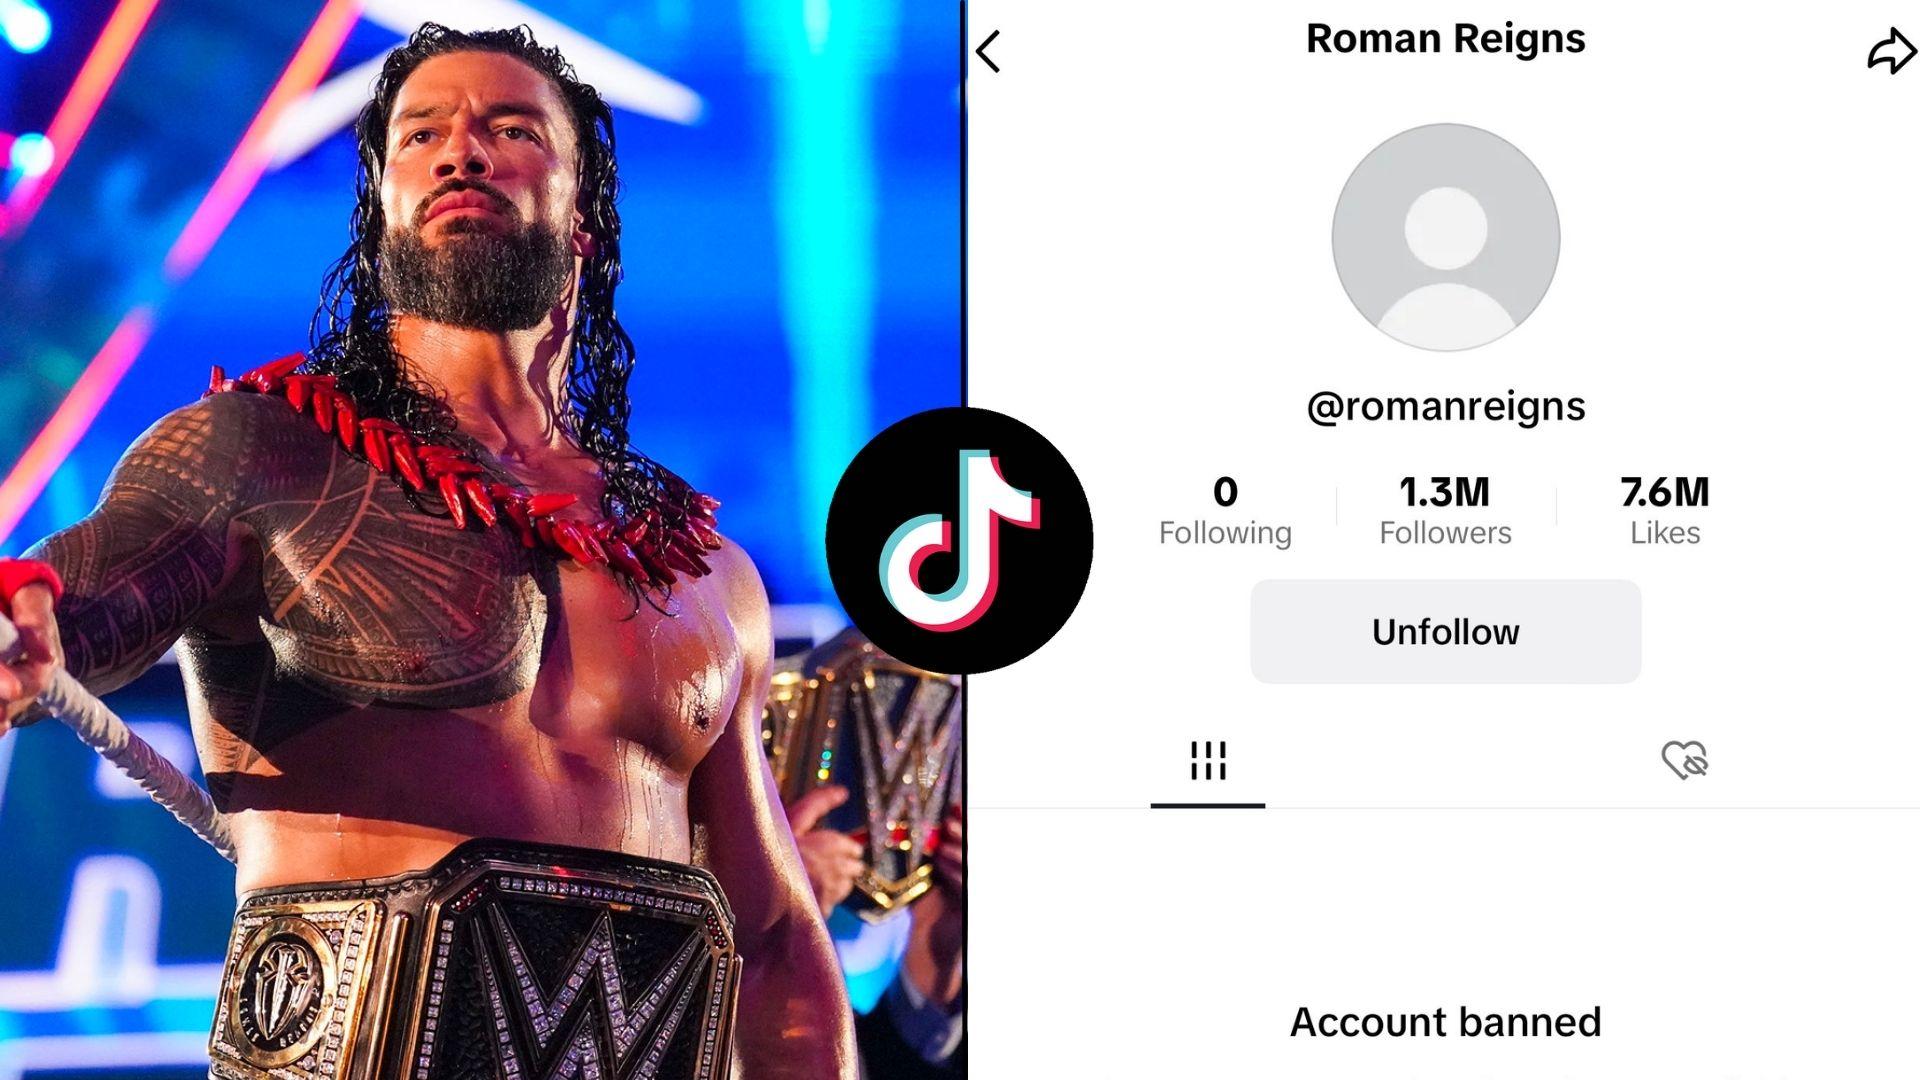 Roman Reigns posing with WWE championship side-by-side with screenshot of banned TikTok account